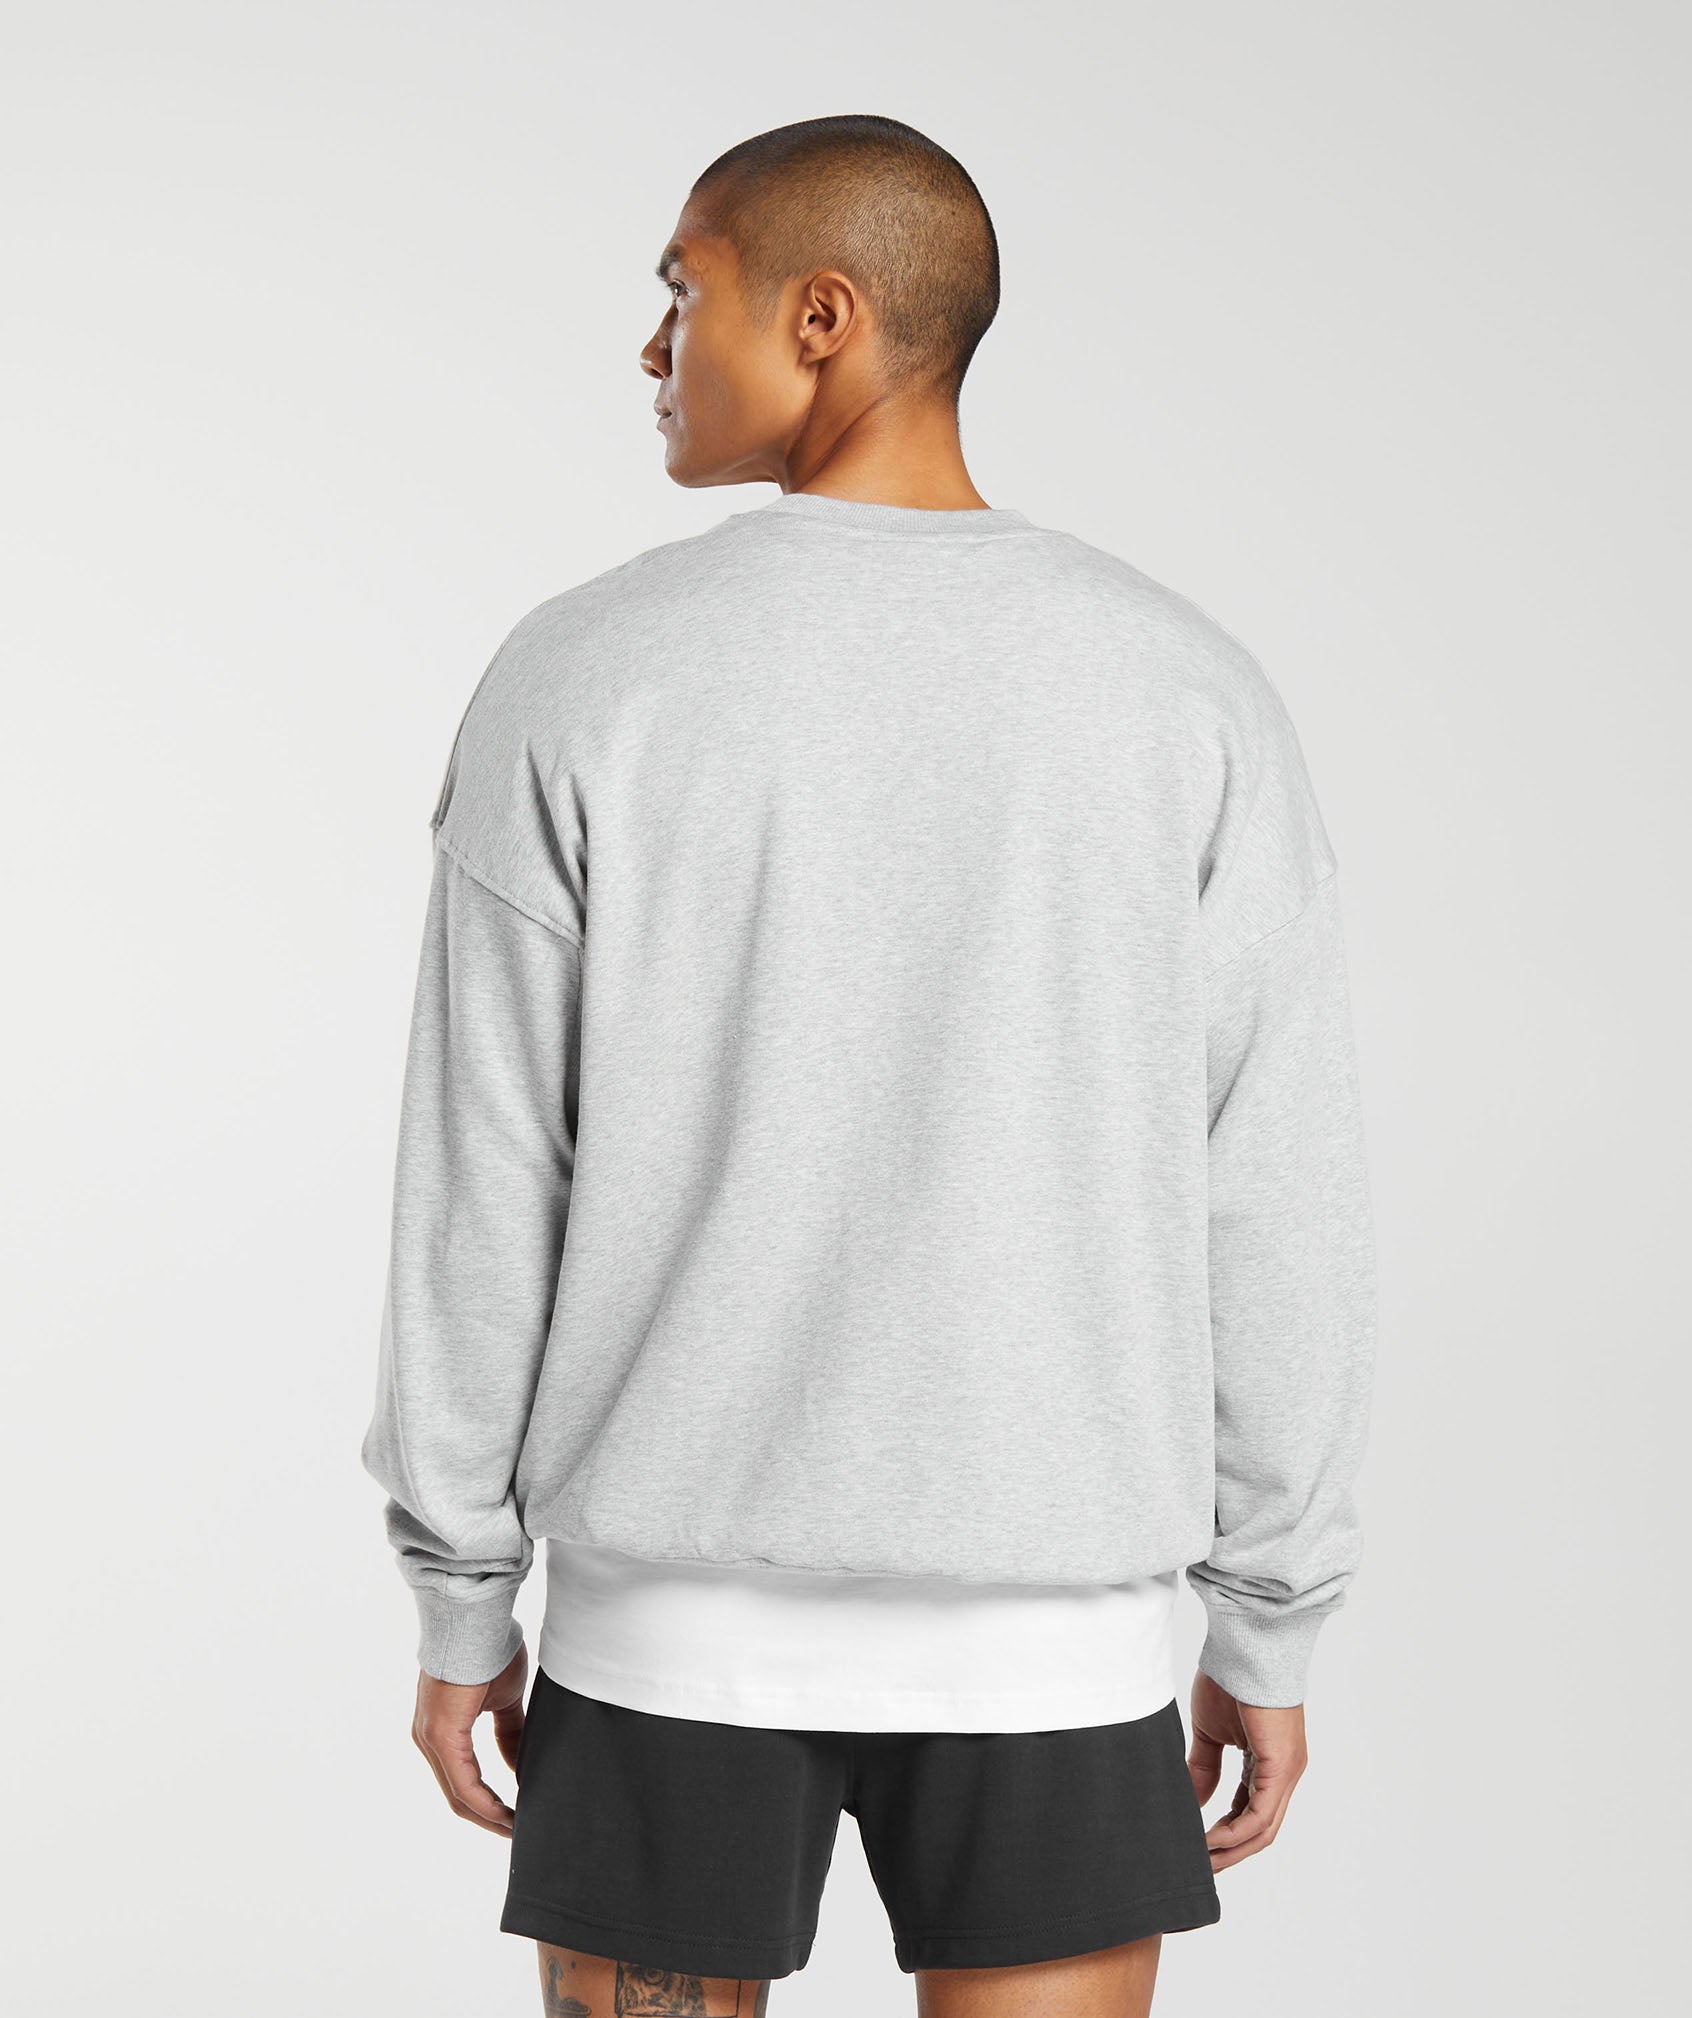 Rest Day Essential Crew in Light Grey Core Marl - view 2